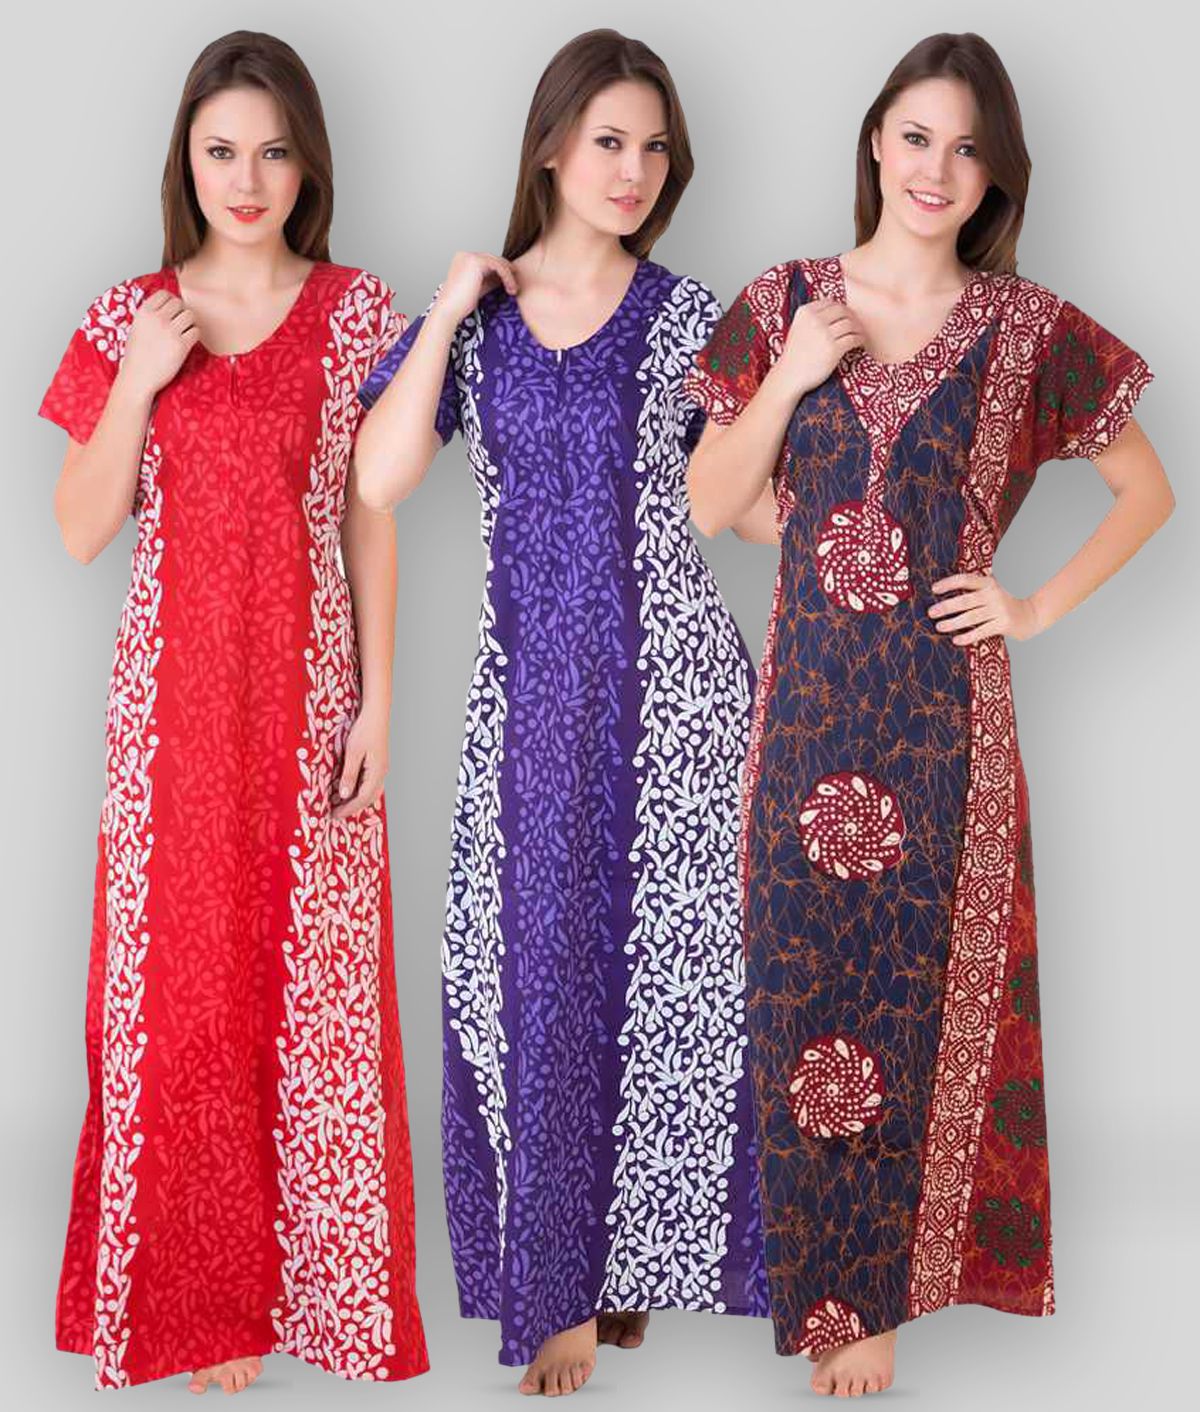     			Masha Cotton Nighty & Night Gowns Red, Purple,Blue Pack of 3